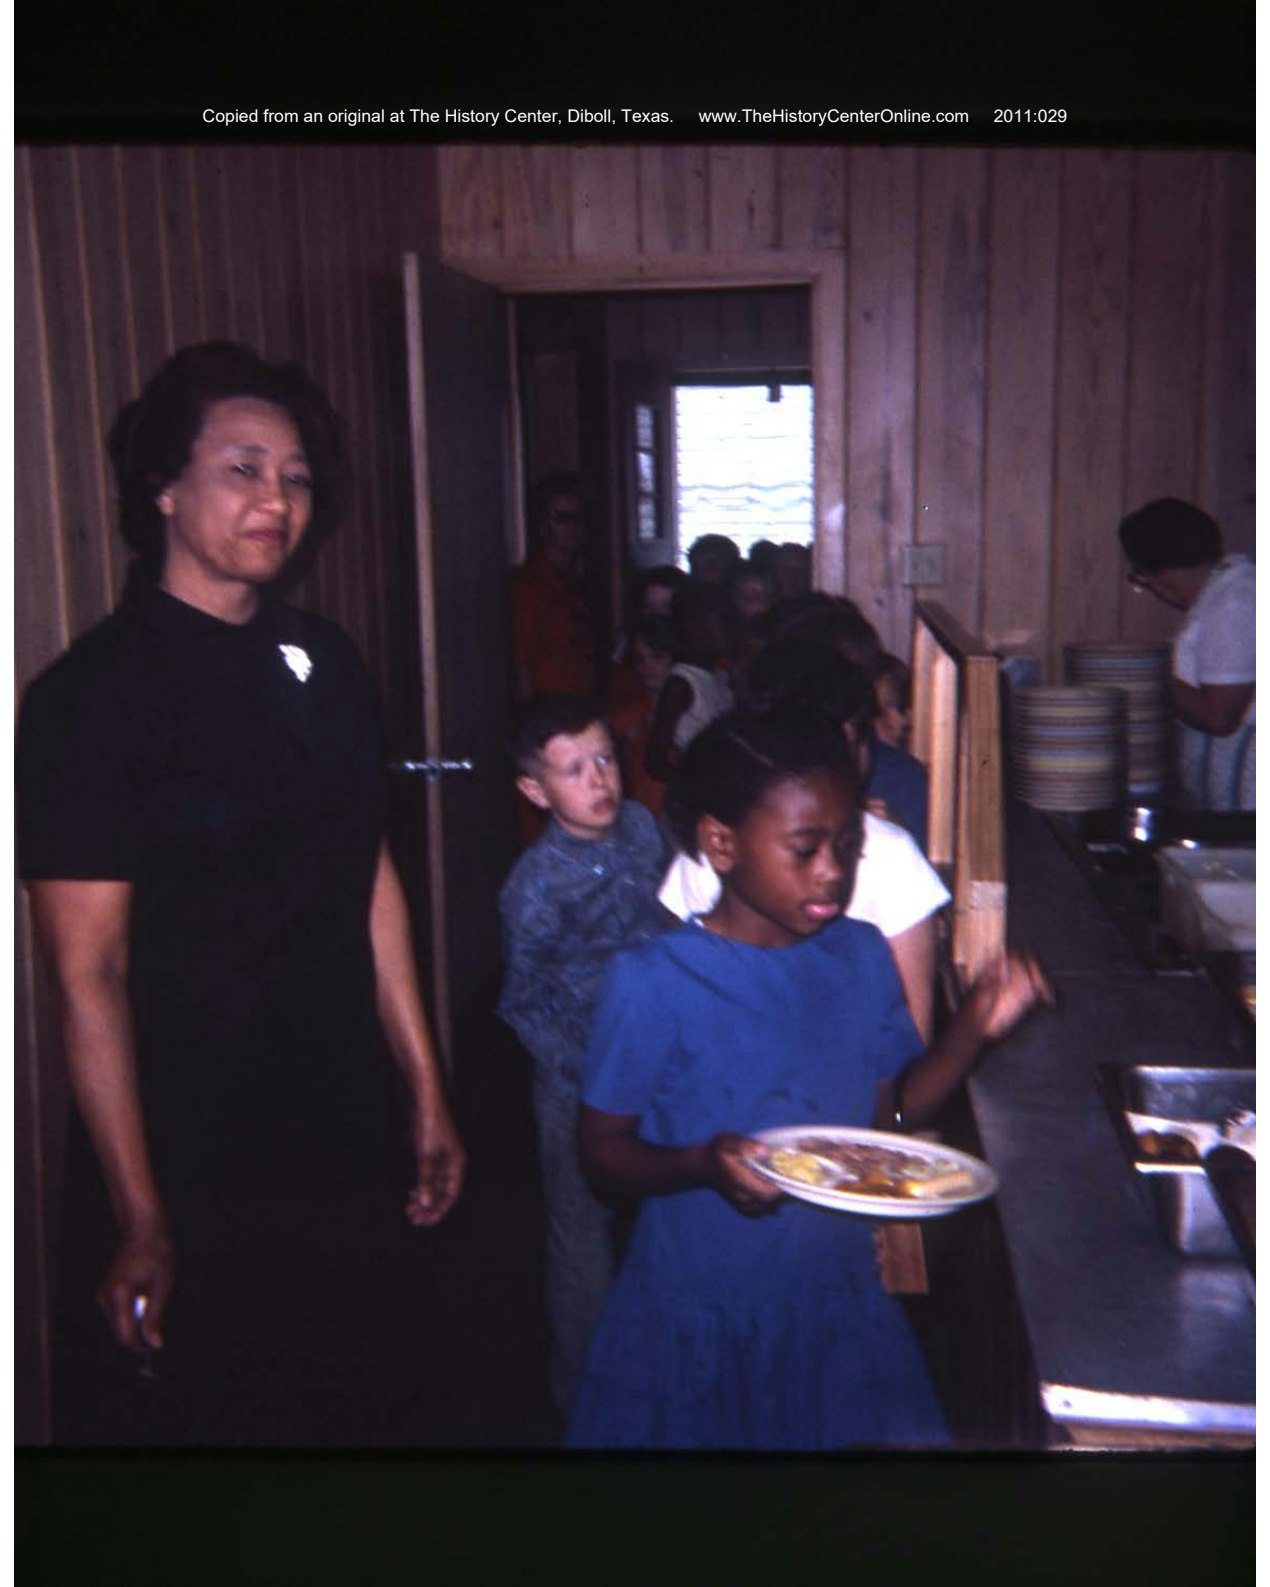 029_Diboll_Elementary_Students_Lunch